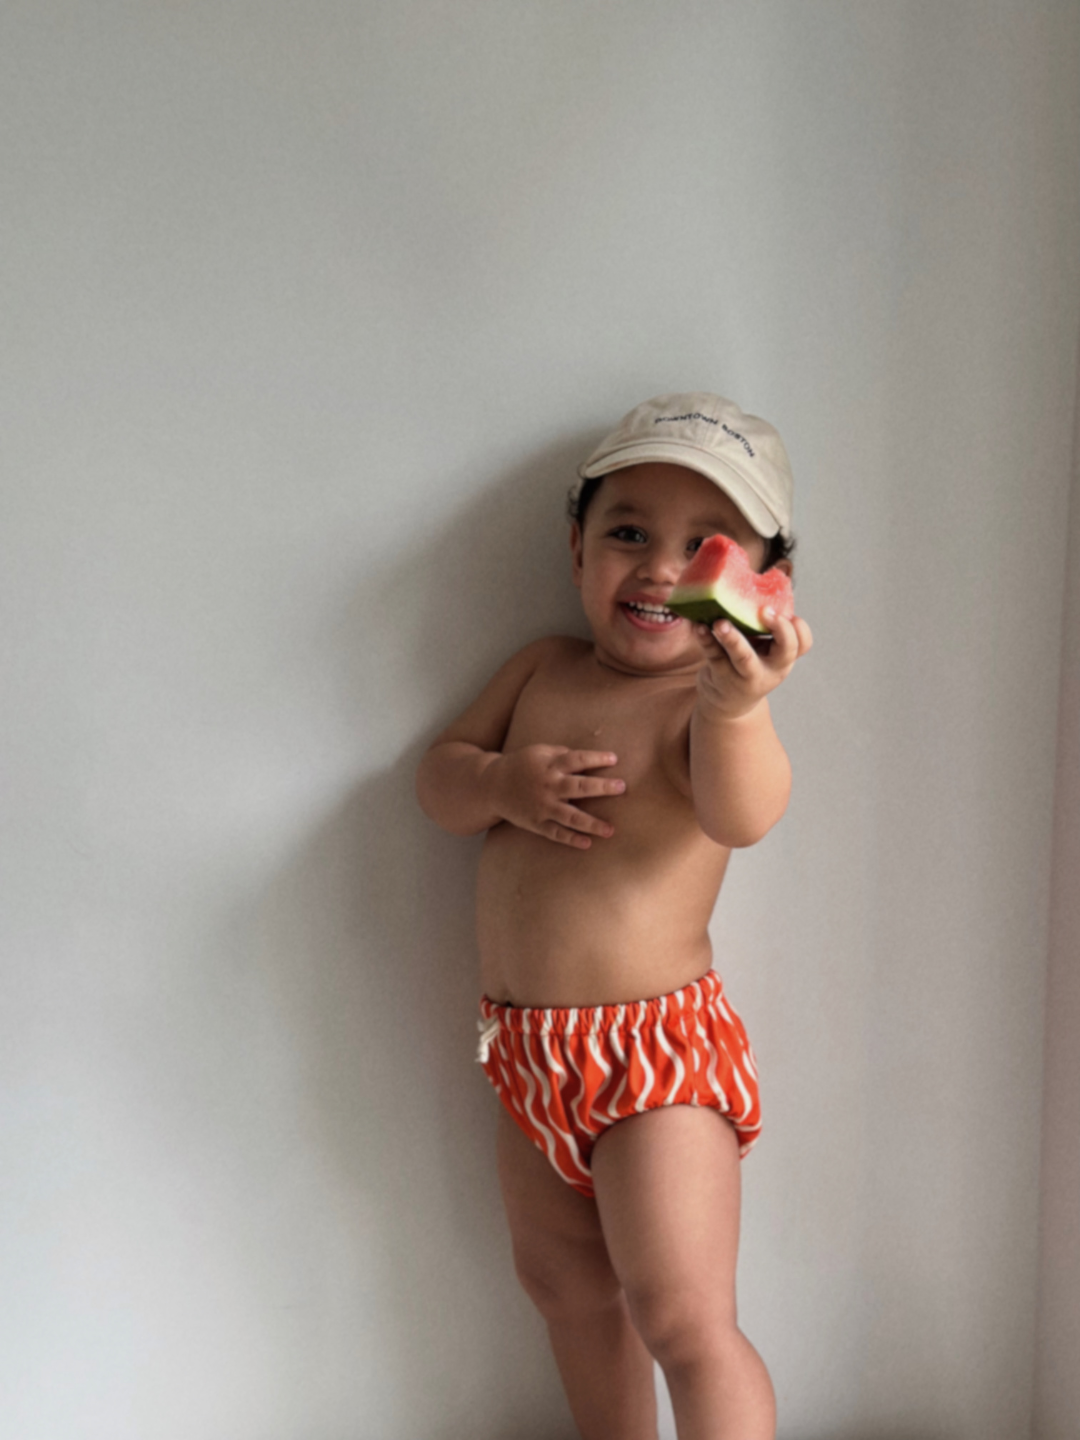 The front view of the swim diaper with an elastic waist with a tie and elastic leg holes on a child standing up. The diaper is a bright orange with wavy and vertical cream colored lines.